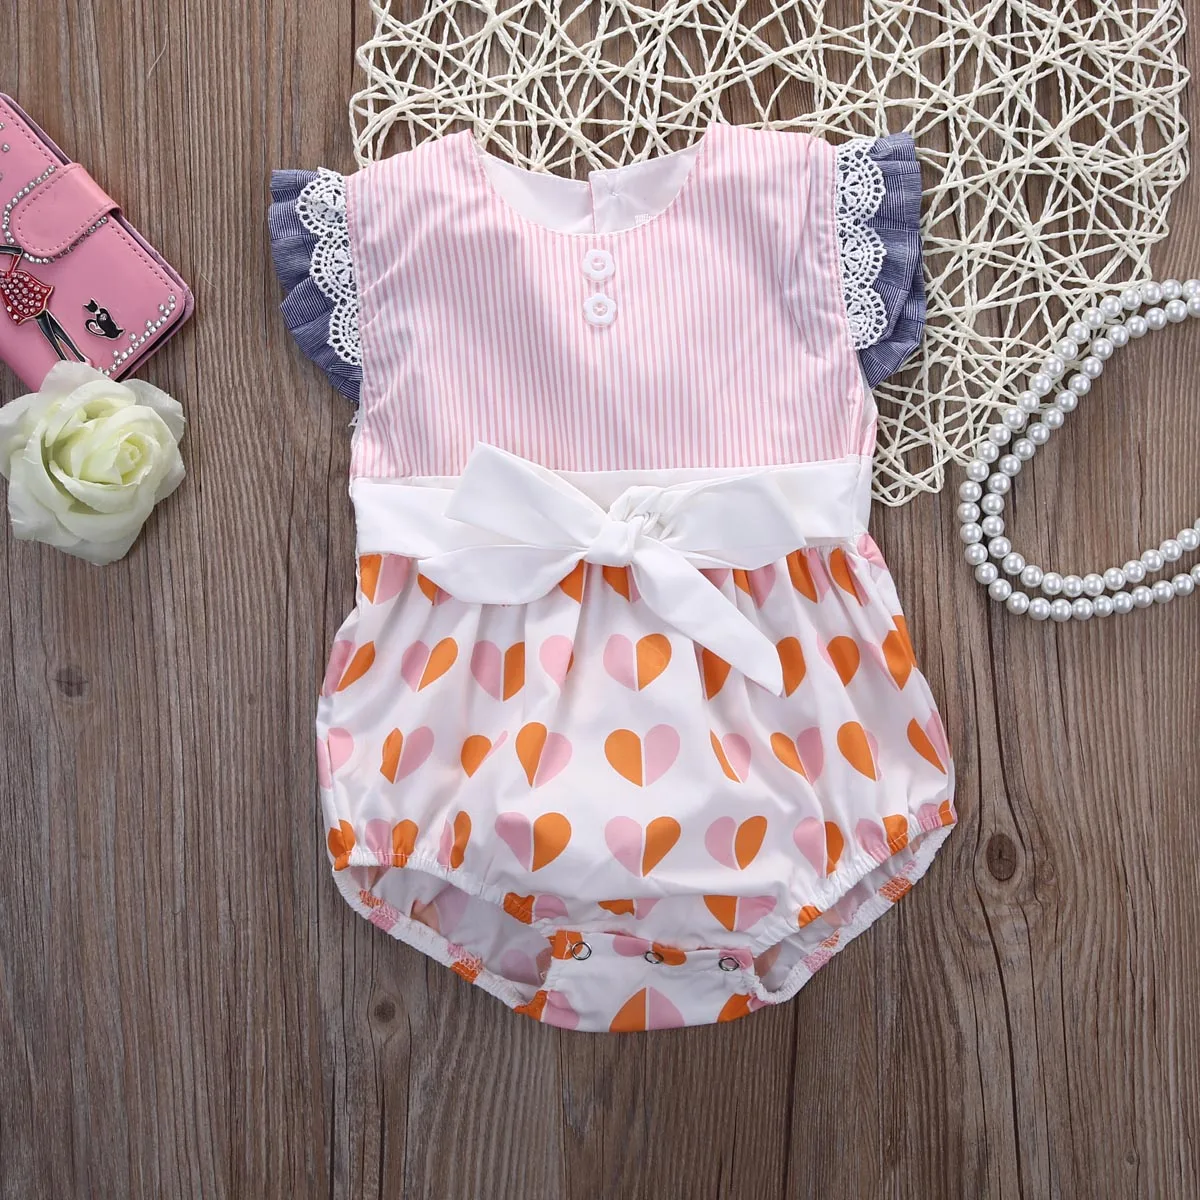 Cotton-Bow-Cute-Pink-Rompers-Infant-Baby-Girl-Clothes-Lace-Floral-Ruffles-Baby-Girl-Romper-Cake-Sunsuit-Outfits-1